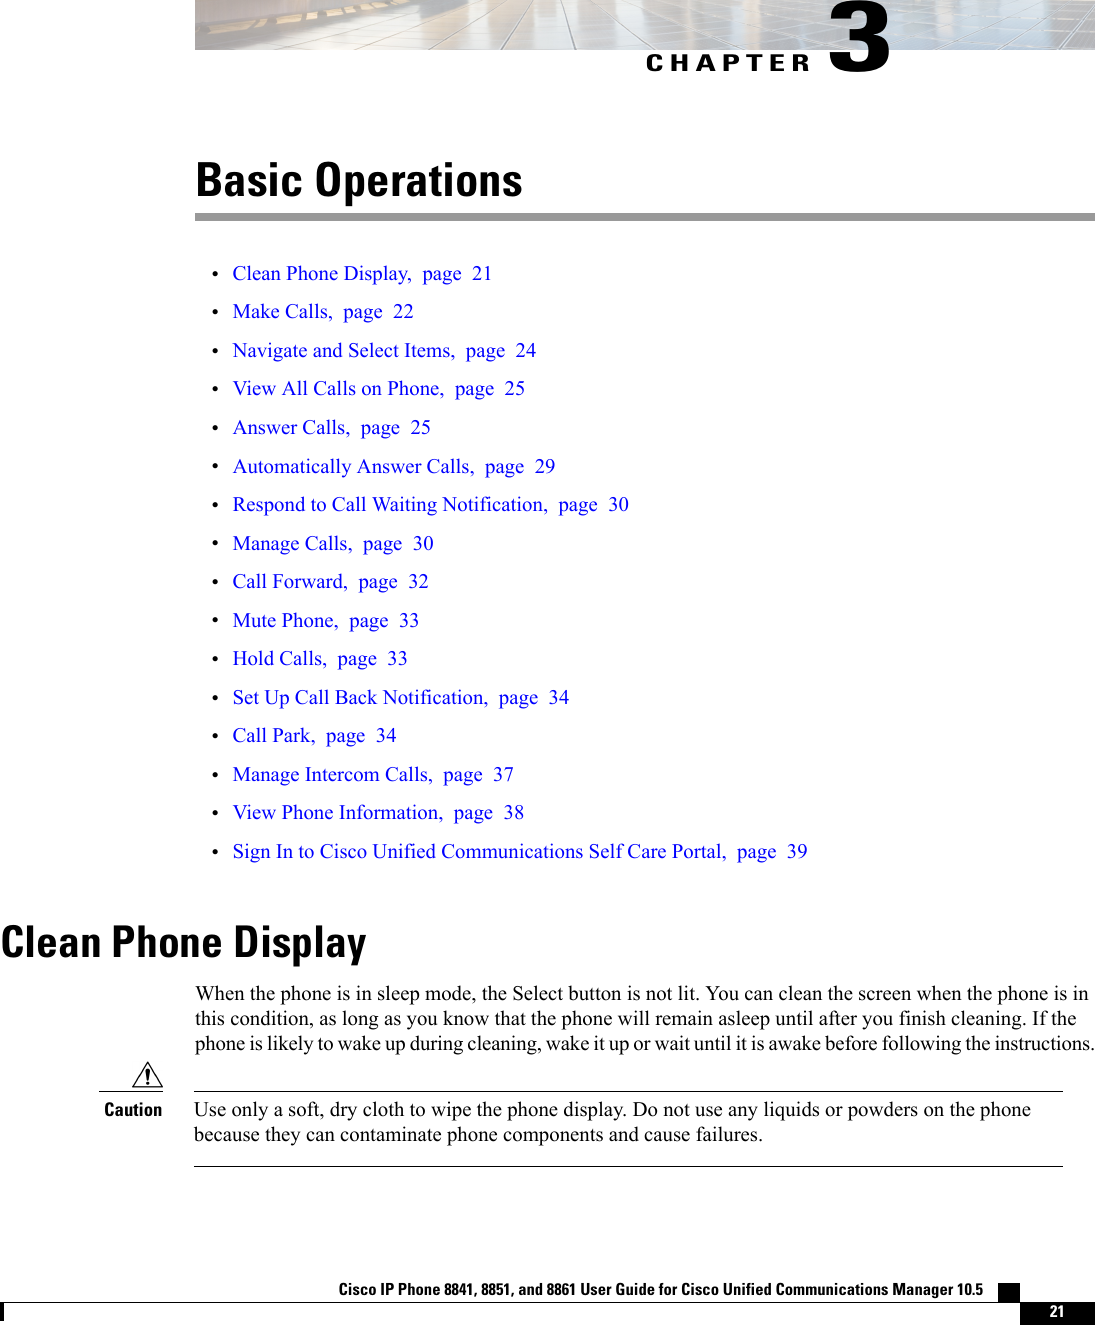 CHAPTER 3Basic Operations•Clean Phone Display, page 21•Make Calls, page 22•Navigate and Select Items, page 24•View All Calls on Phone, page 25•Answer Calls, page 25•Automatically Answer Calls, page 29•Respond to Call Waiting Notification, page 30•Manage Calls, page 30•Call Forward, page 32•Mute Phone, page 33•Hold Calls, page 33•Set Up Call Back Notification, page 34•Call Park, page 34•Manage Intercom Calls, page 37•View Phone Information, page 38•Sign In to Cisco Unified Communications Self Care Portal, page 39Clean Phone DisplayWhen the phone is in sleep mode, the Select button is not lit. You can clean the screen when the phone is inthis condition, as long as you know that the phone will remain asleep until after you finish cleaning. If thephone is likely to wake up during cleaning, wake it up or wait until it is awake before following the instructions.Use only a soft, dry cloth to wipe the phone display. Do not use any liquids or powders on the phonebecause they can contaminate phone components and cause failures.CautionCisco IP Phone 8841, 8851, and 8861 User Guide for Cisco Unified Communications Manager 10.5    21